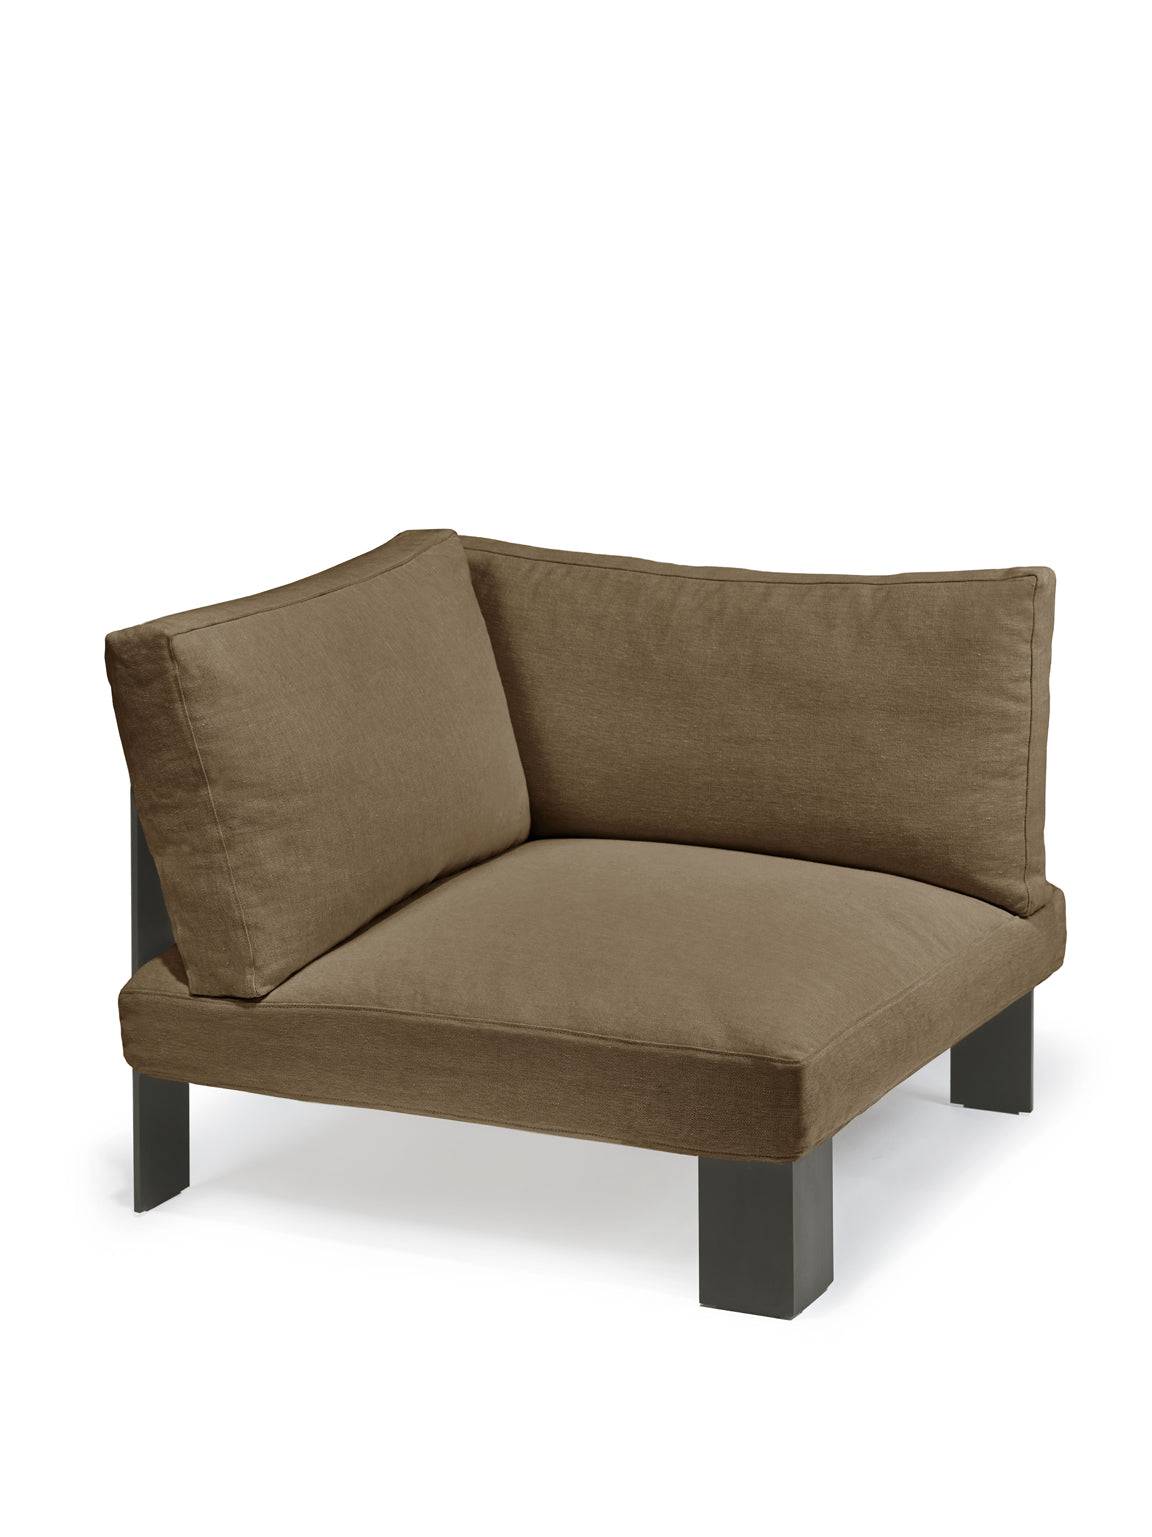 Mombaers Outdoor Sofa - Camel - THAT COOL LIVING